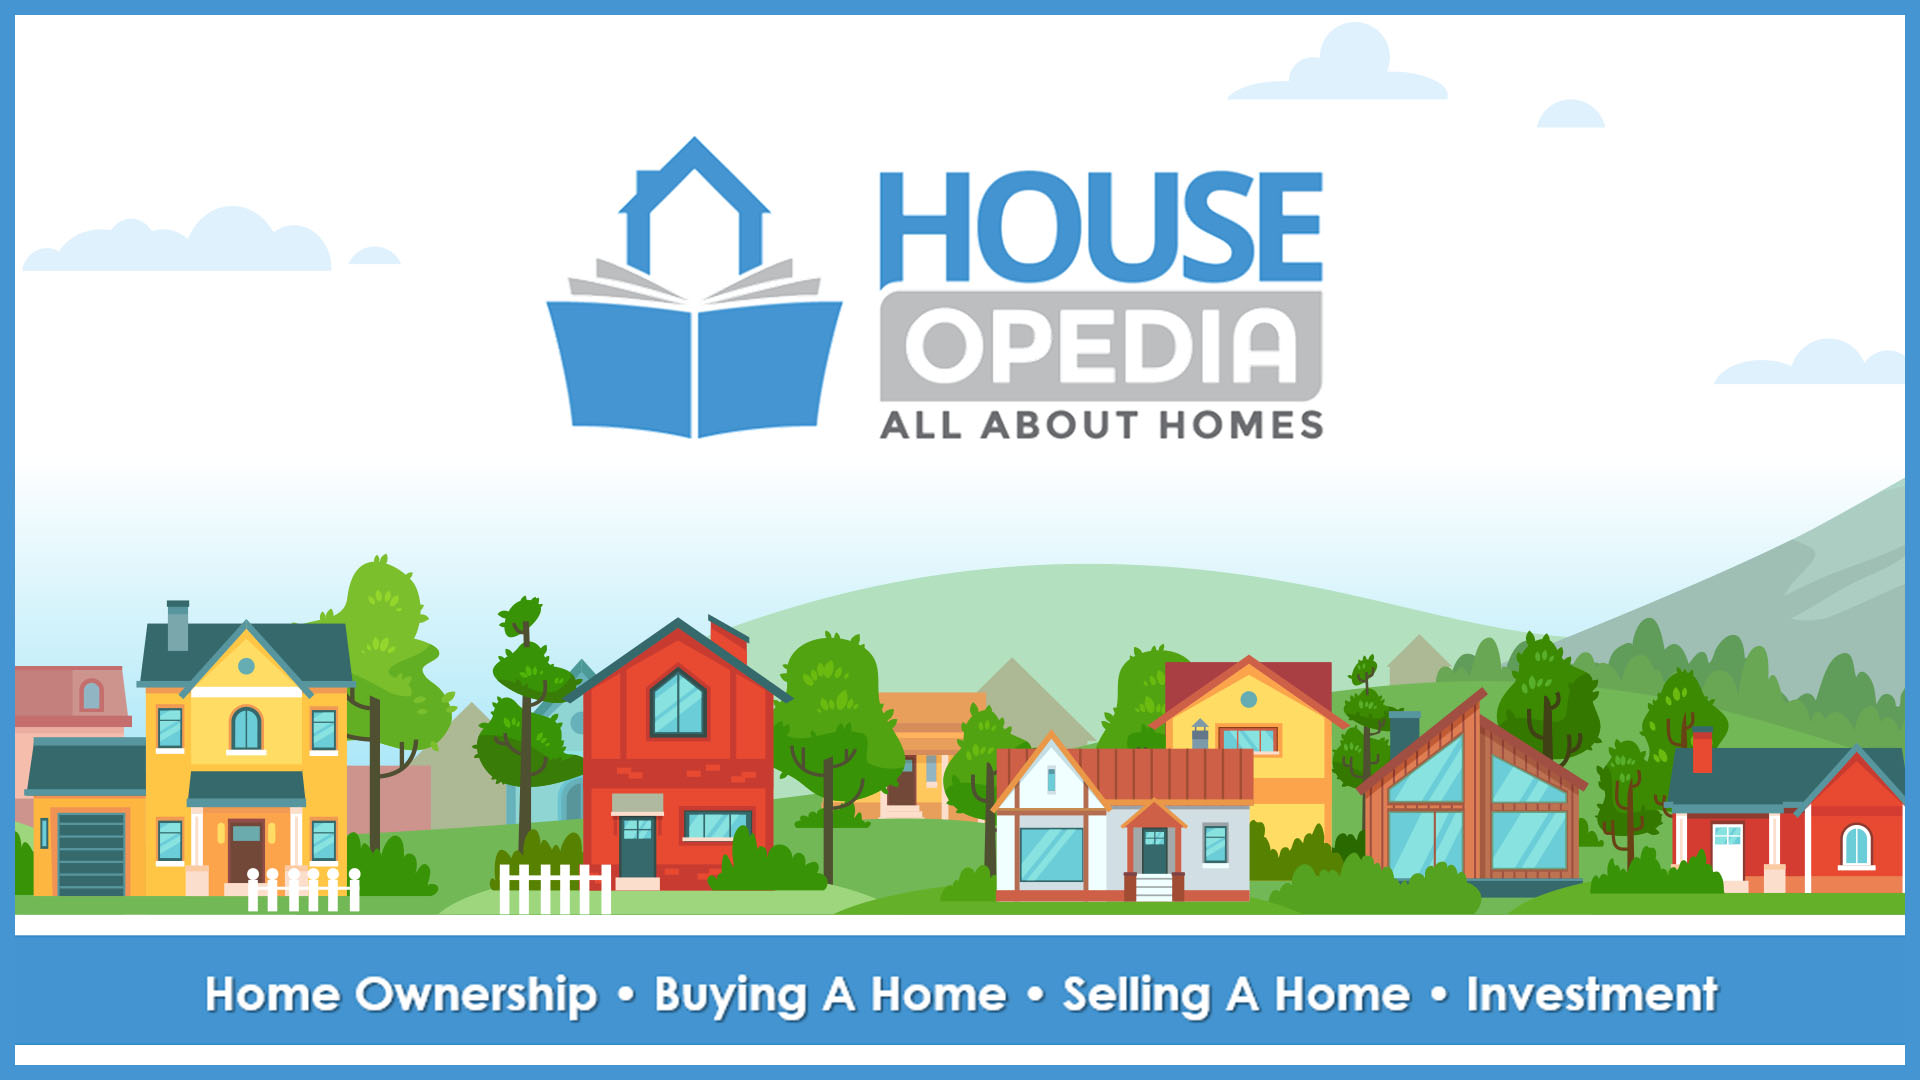 Featured image for “How To Use A Houseopedia Article”